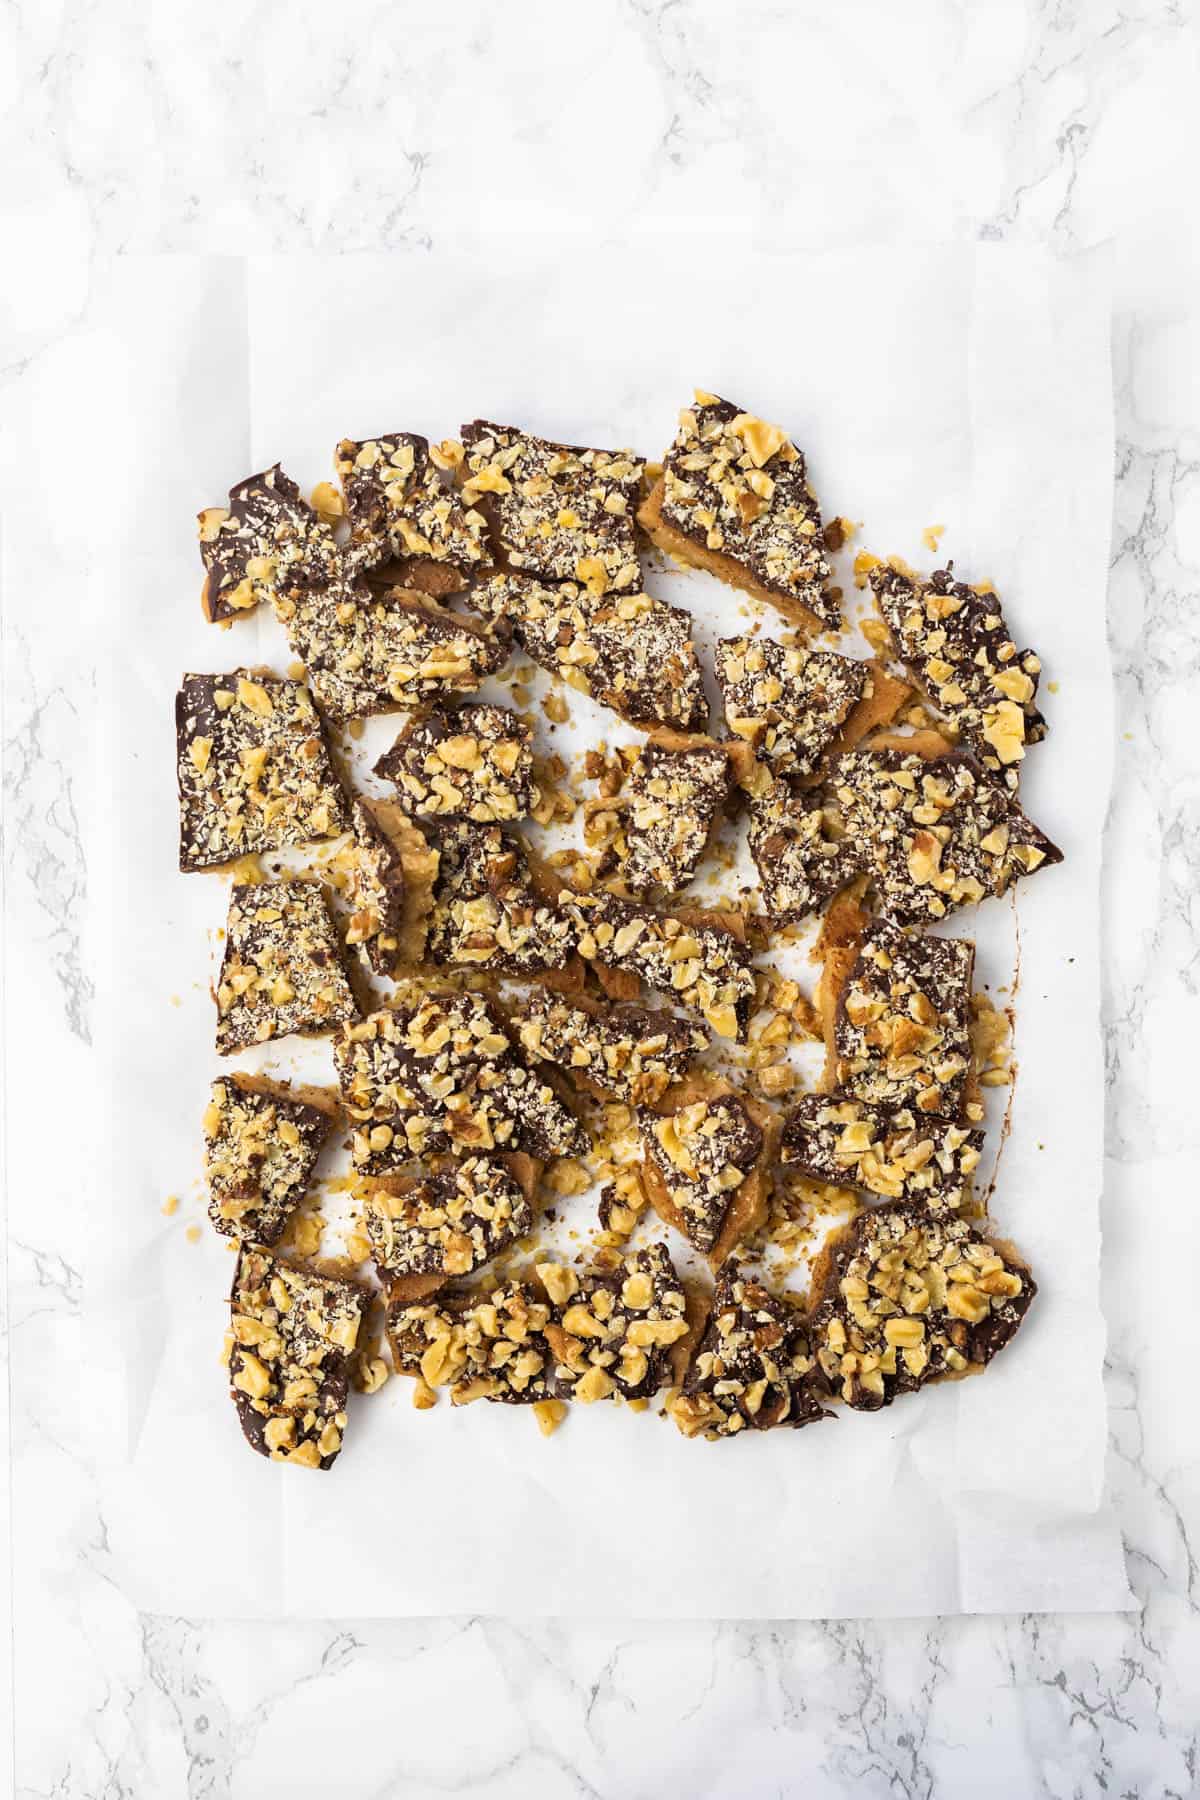 Broken up pieces of English toffee on piece of parchment paper on marble countertop